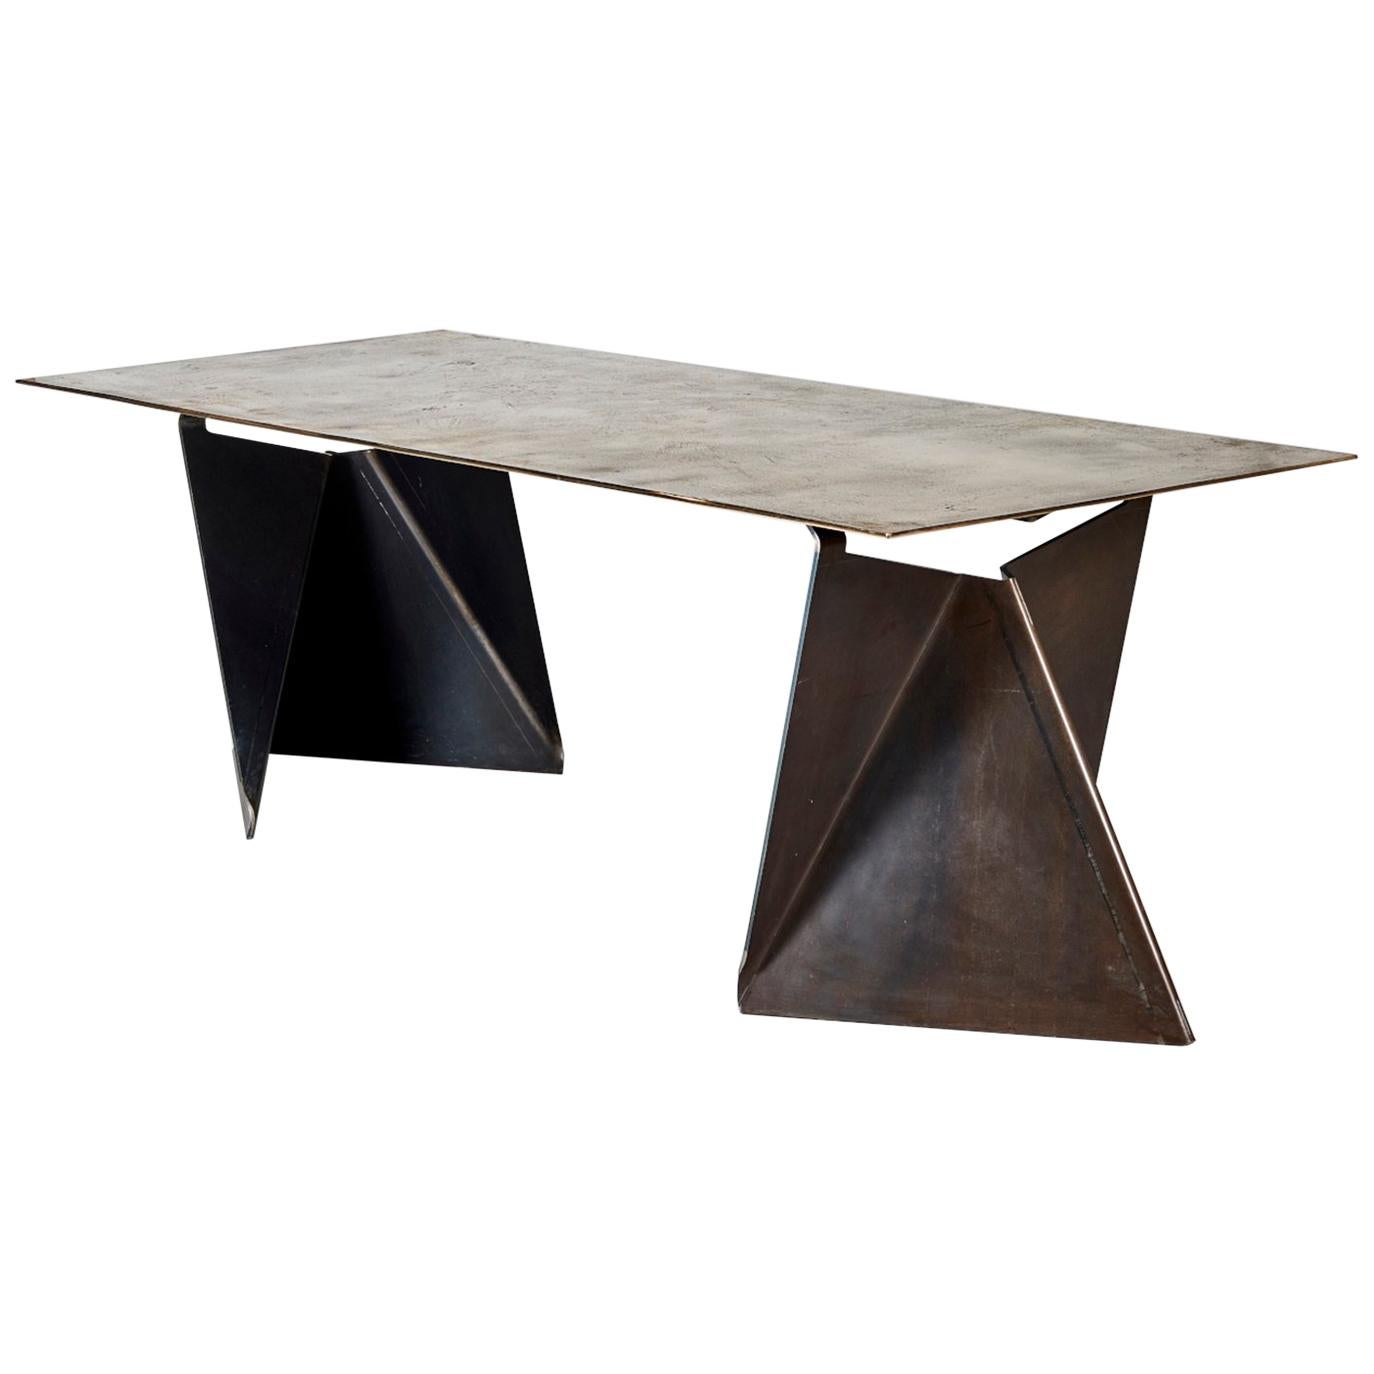 Xandre Kriel, "Vos Altar", Bronze Top and Steel Base Table